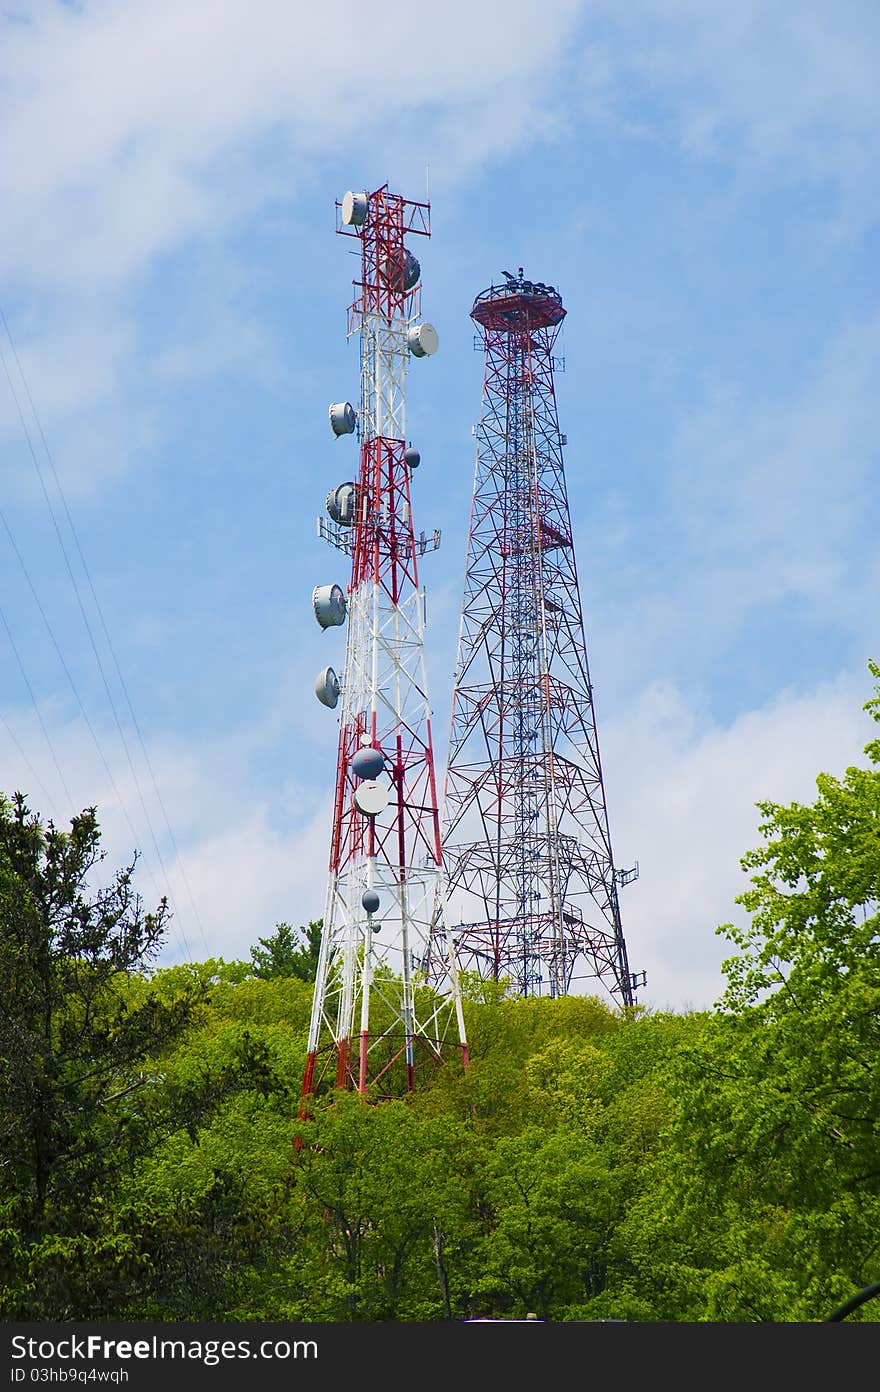 Cell phone and communication towers against blue sky with scattered clouds